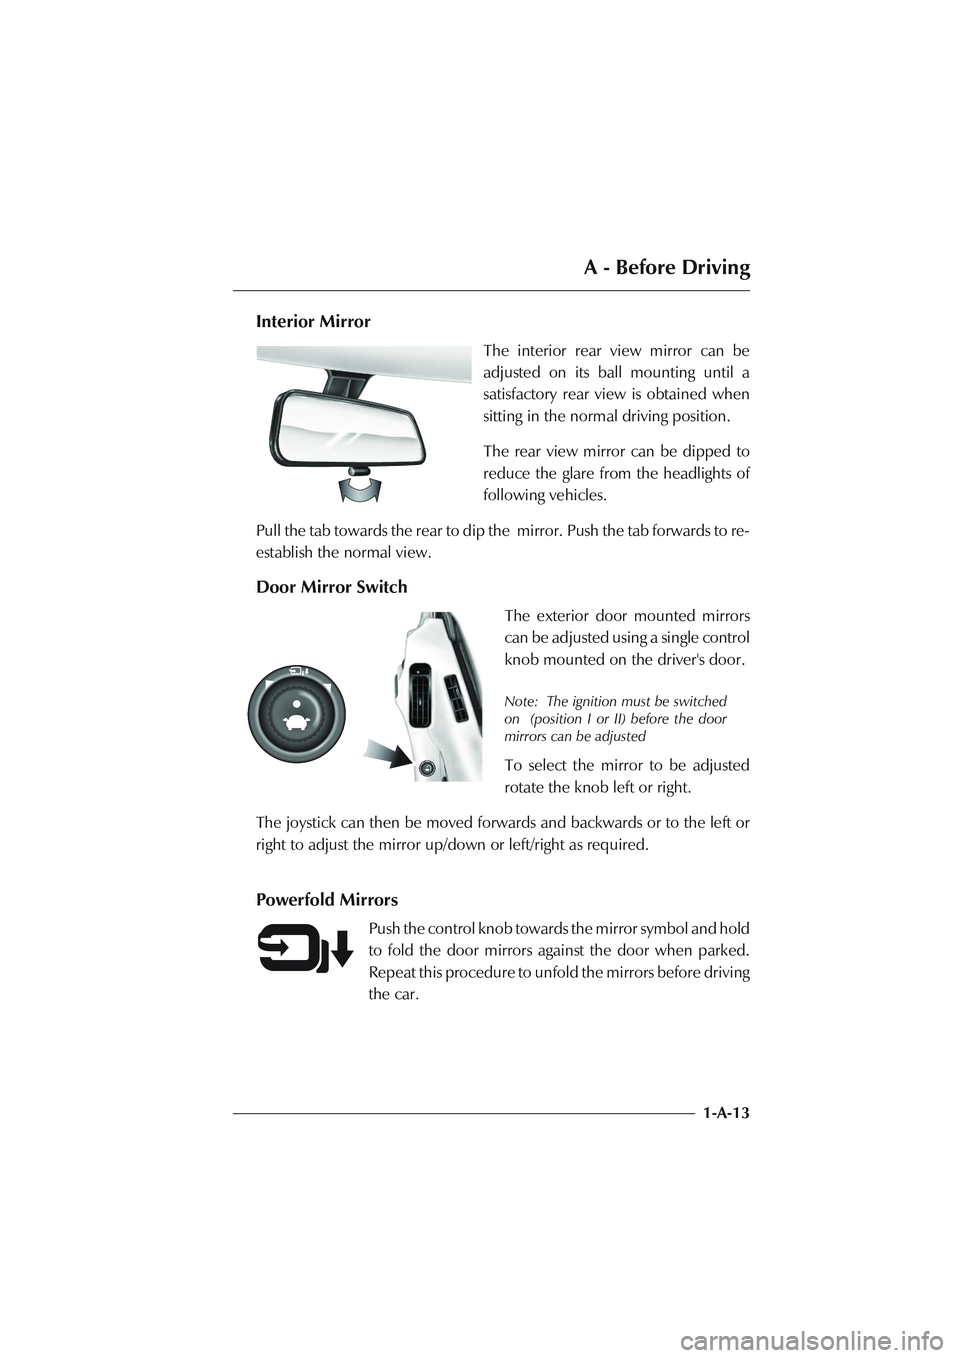 ASTON MARTIN DB AR1 Q 2003  Owners Guide A - Before Driving
1-A-13
Interior Mirror
The interior rear view mirror can be
adjusted on its ball mounting until a
satisfactory rear view is obtained when
sitting in the normal driving position.
The